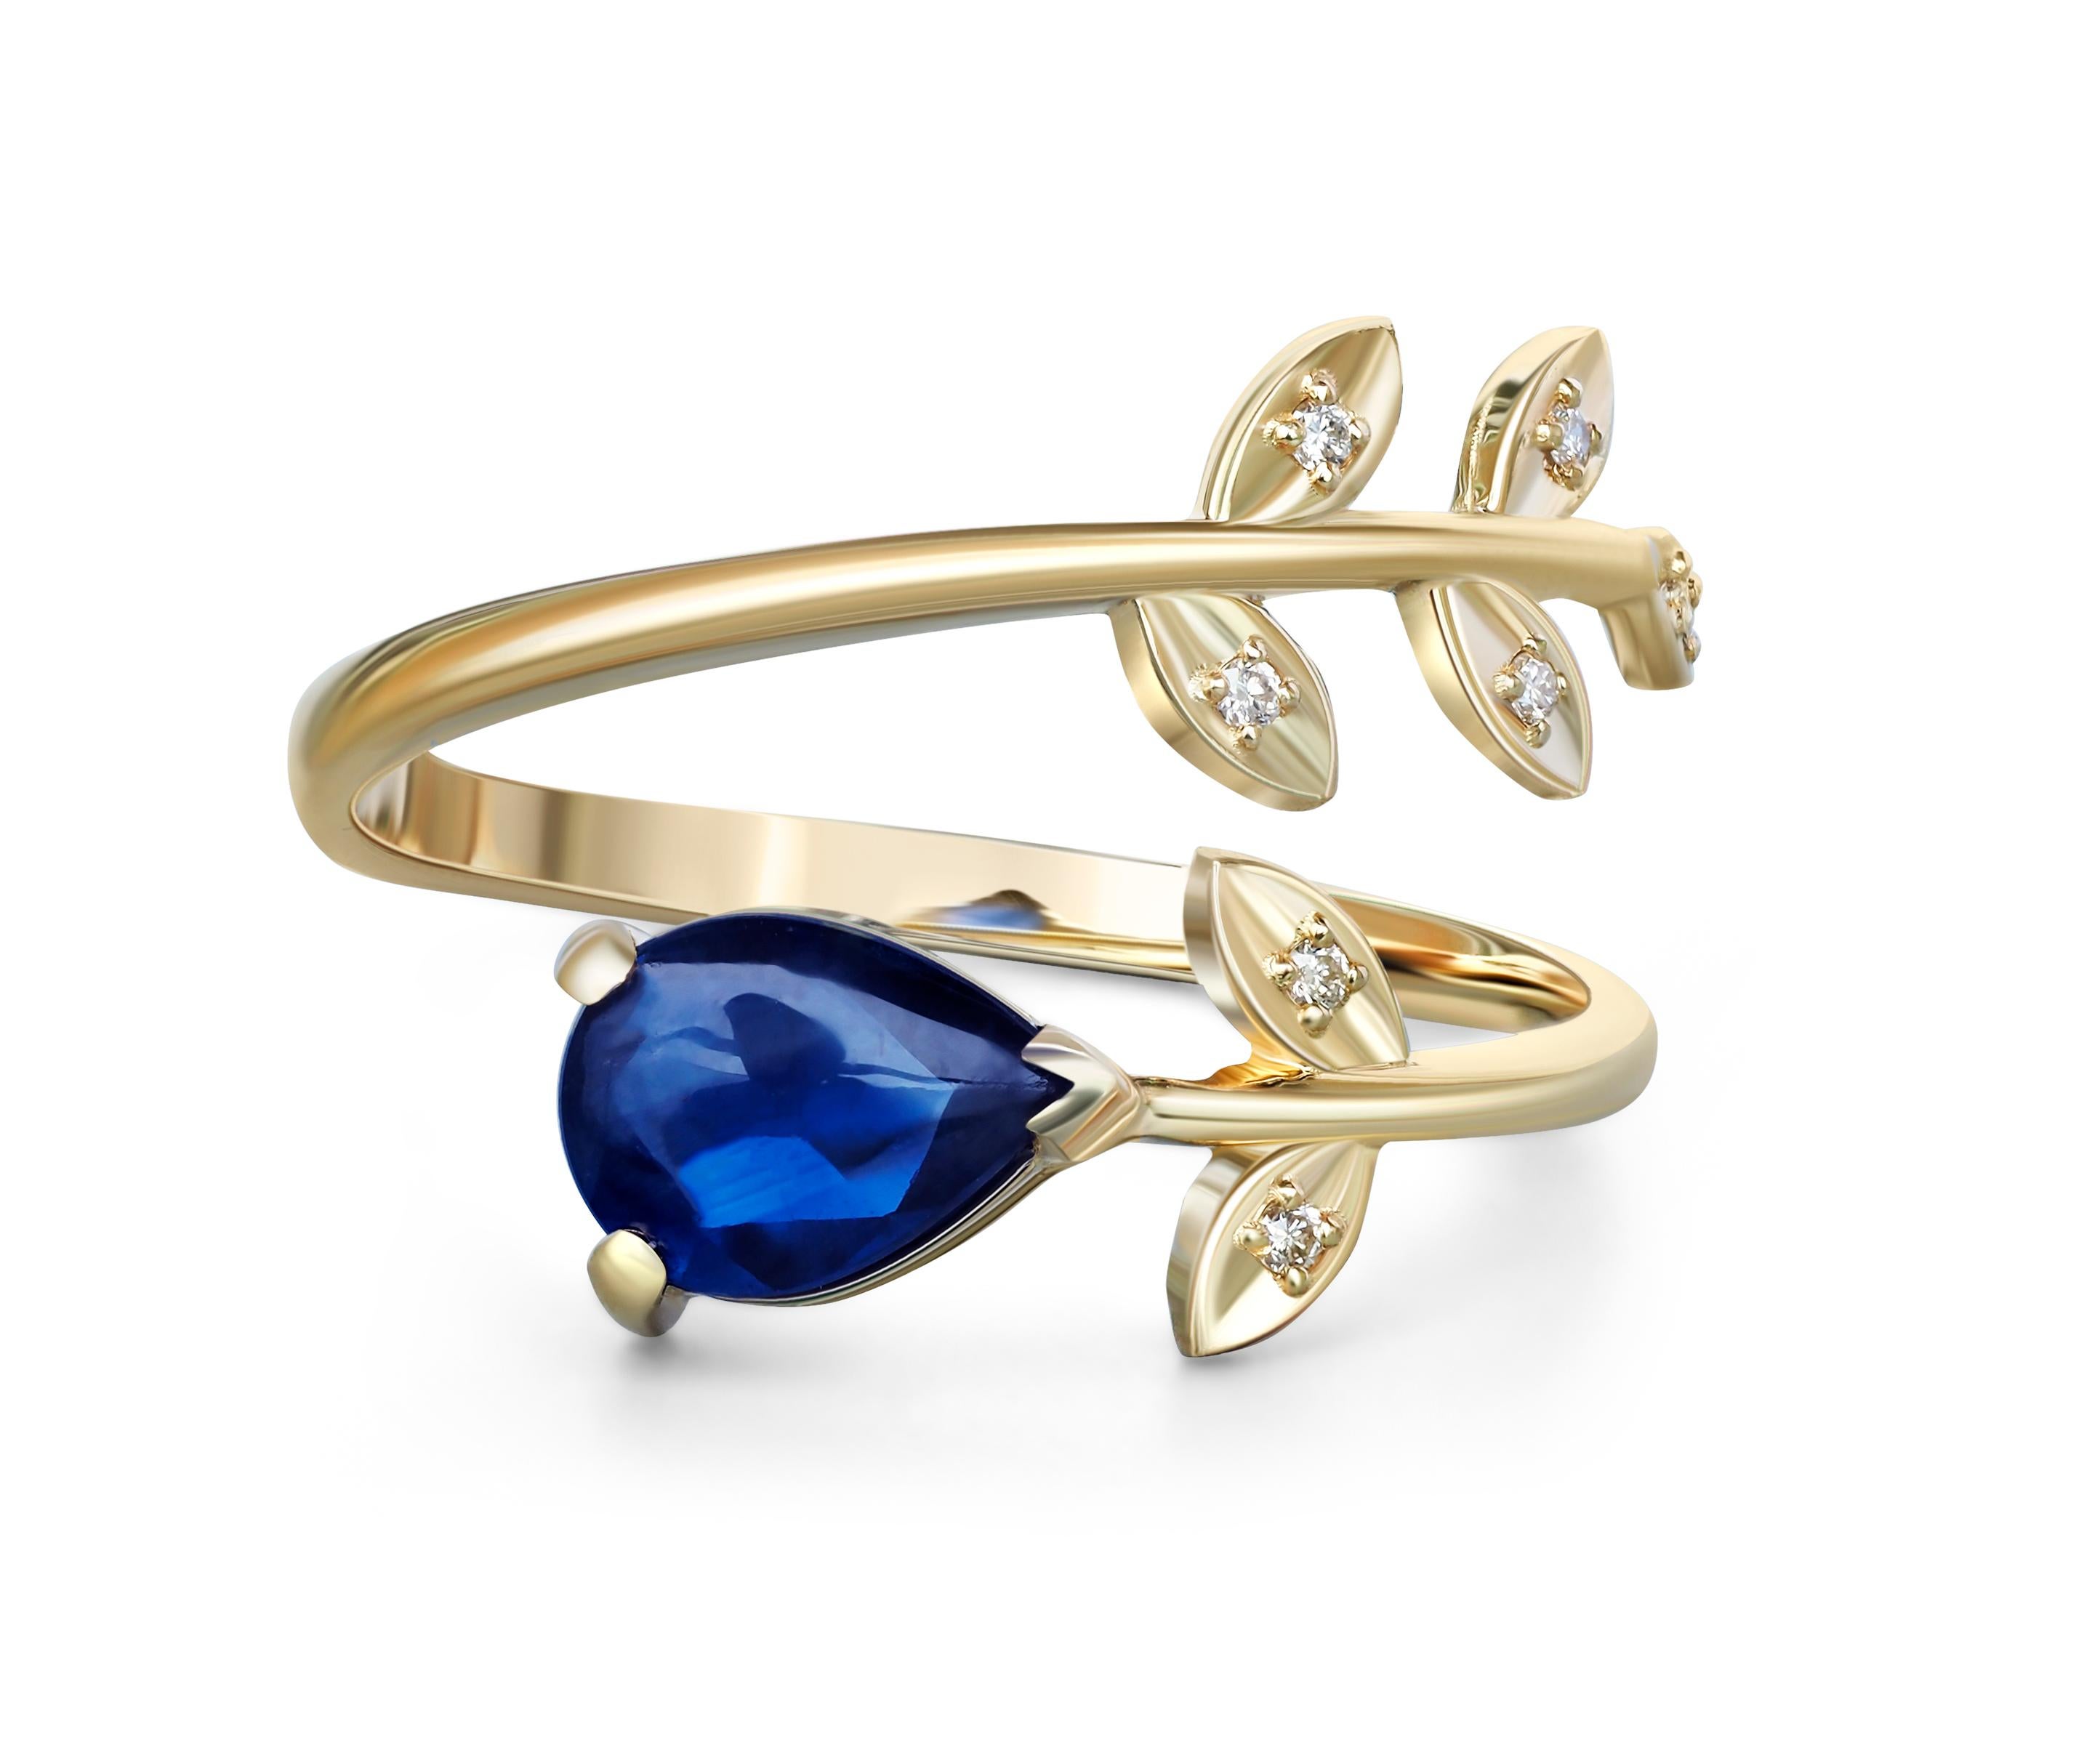 Pear sapphire 14k gold ring. 
Blue sapphire gold ring. Genuine sapphire ring. Gold leaves ring. Floral gold ring. Delicate gold ring.

Weight: 2 g. depends from size.
Metal: 14k gold.
 
Set with sapphire
Pear shape, approx 0.8 ct, blue